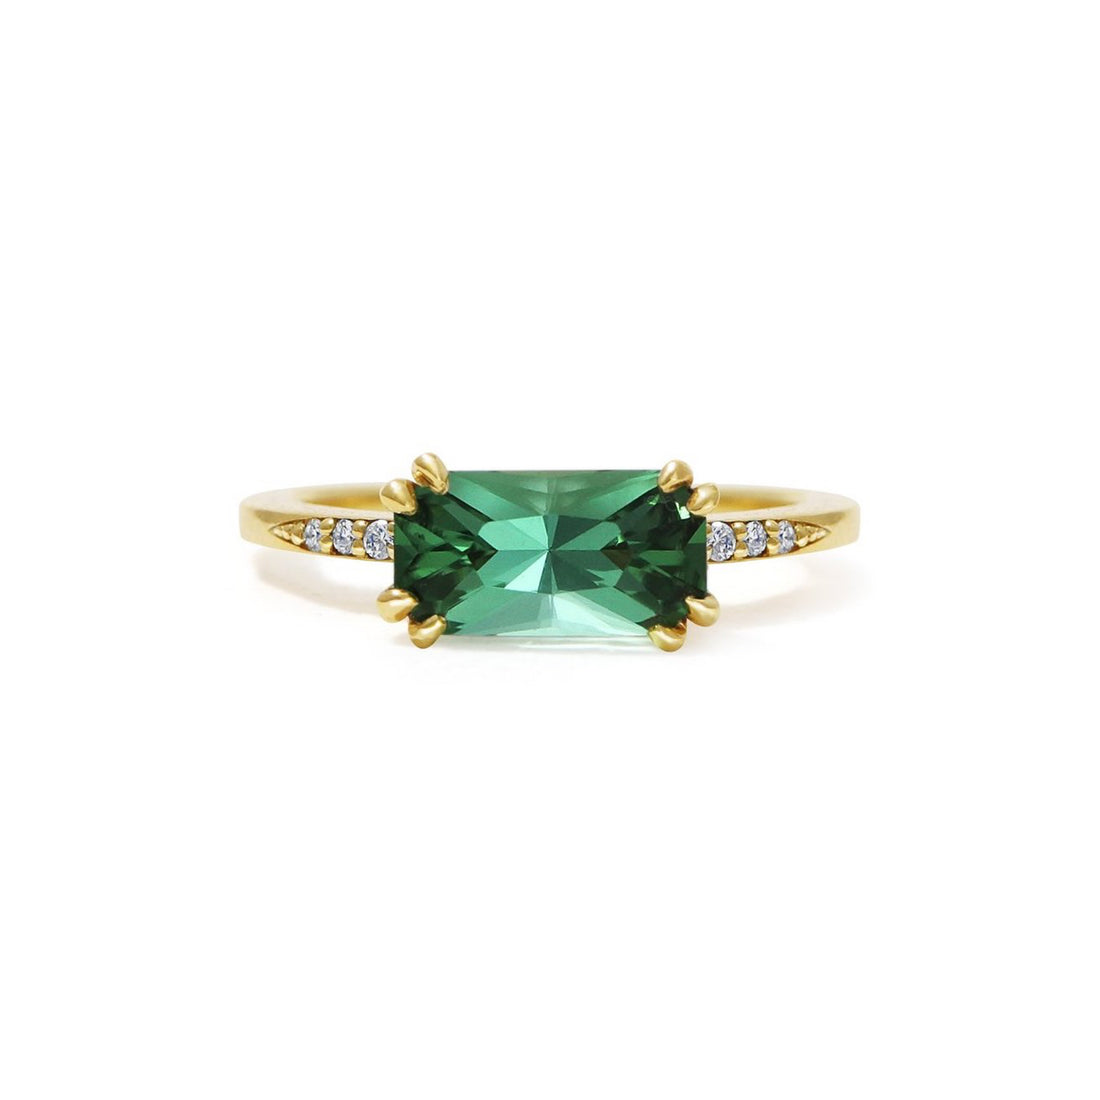  Mint Green Tourmaline & Diamond Ring by Michelle Oh | The Cut London